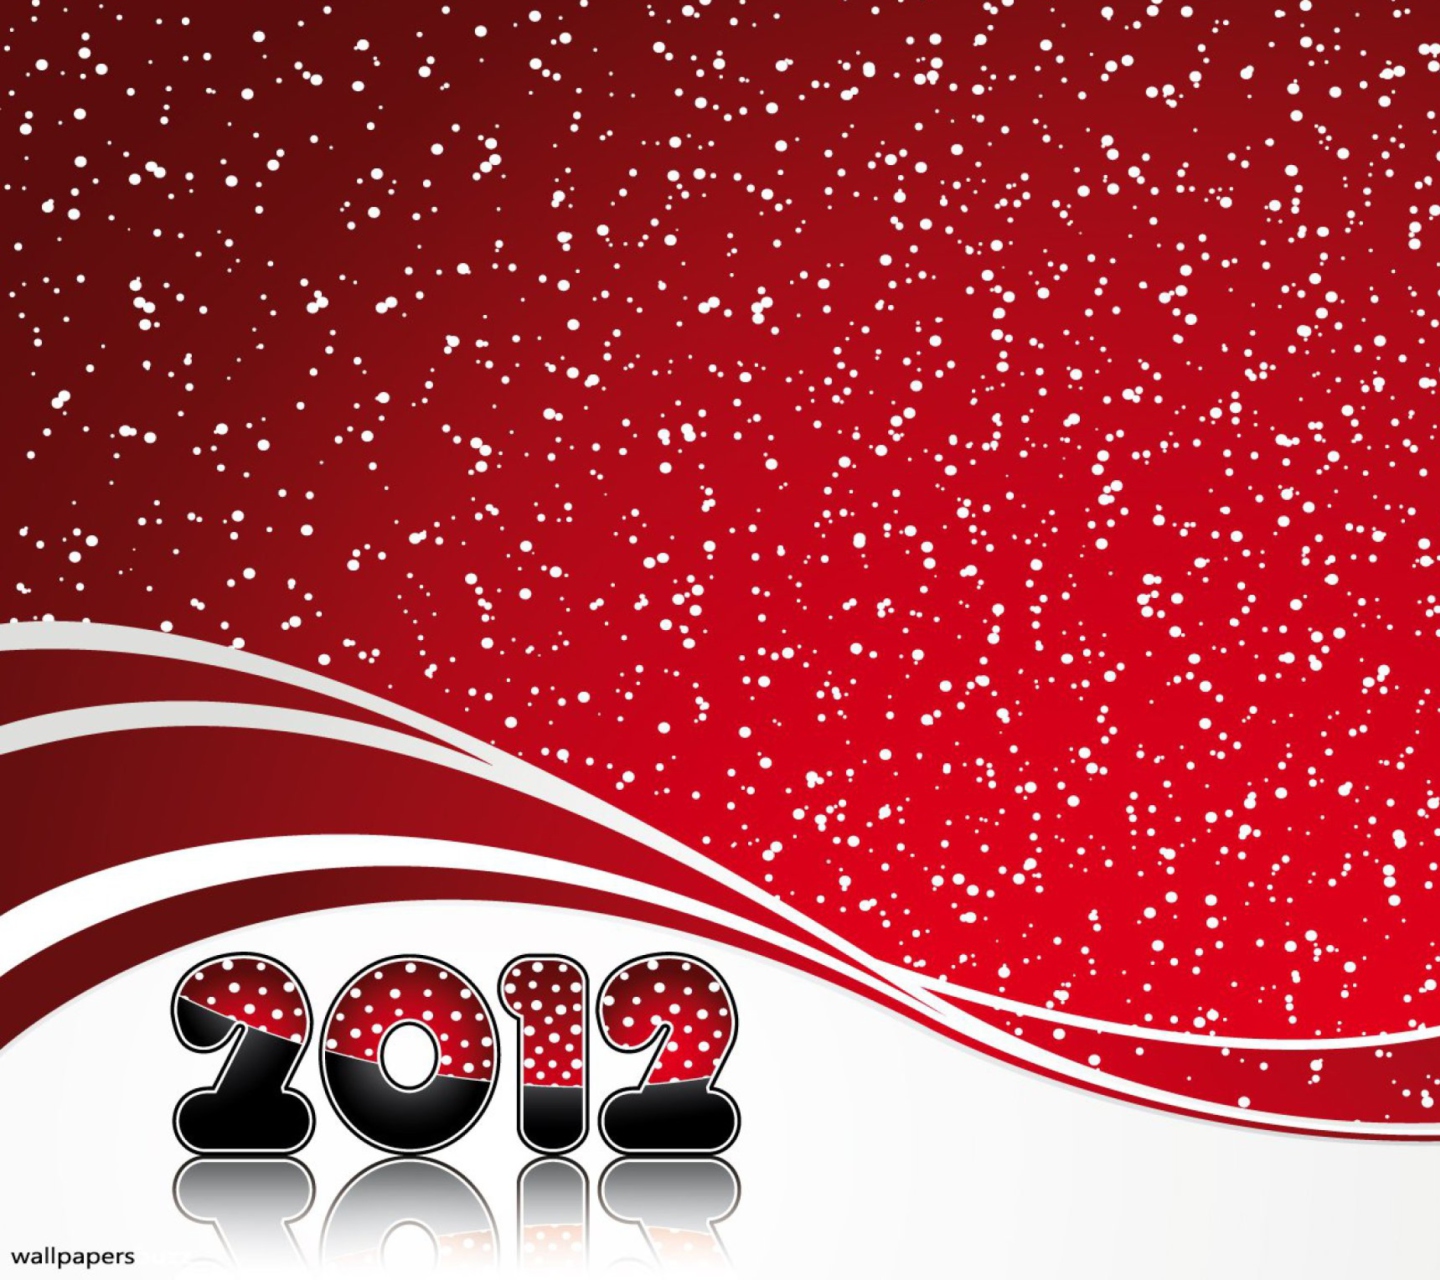 Red Snow New Year wallpaper 1440x1280